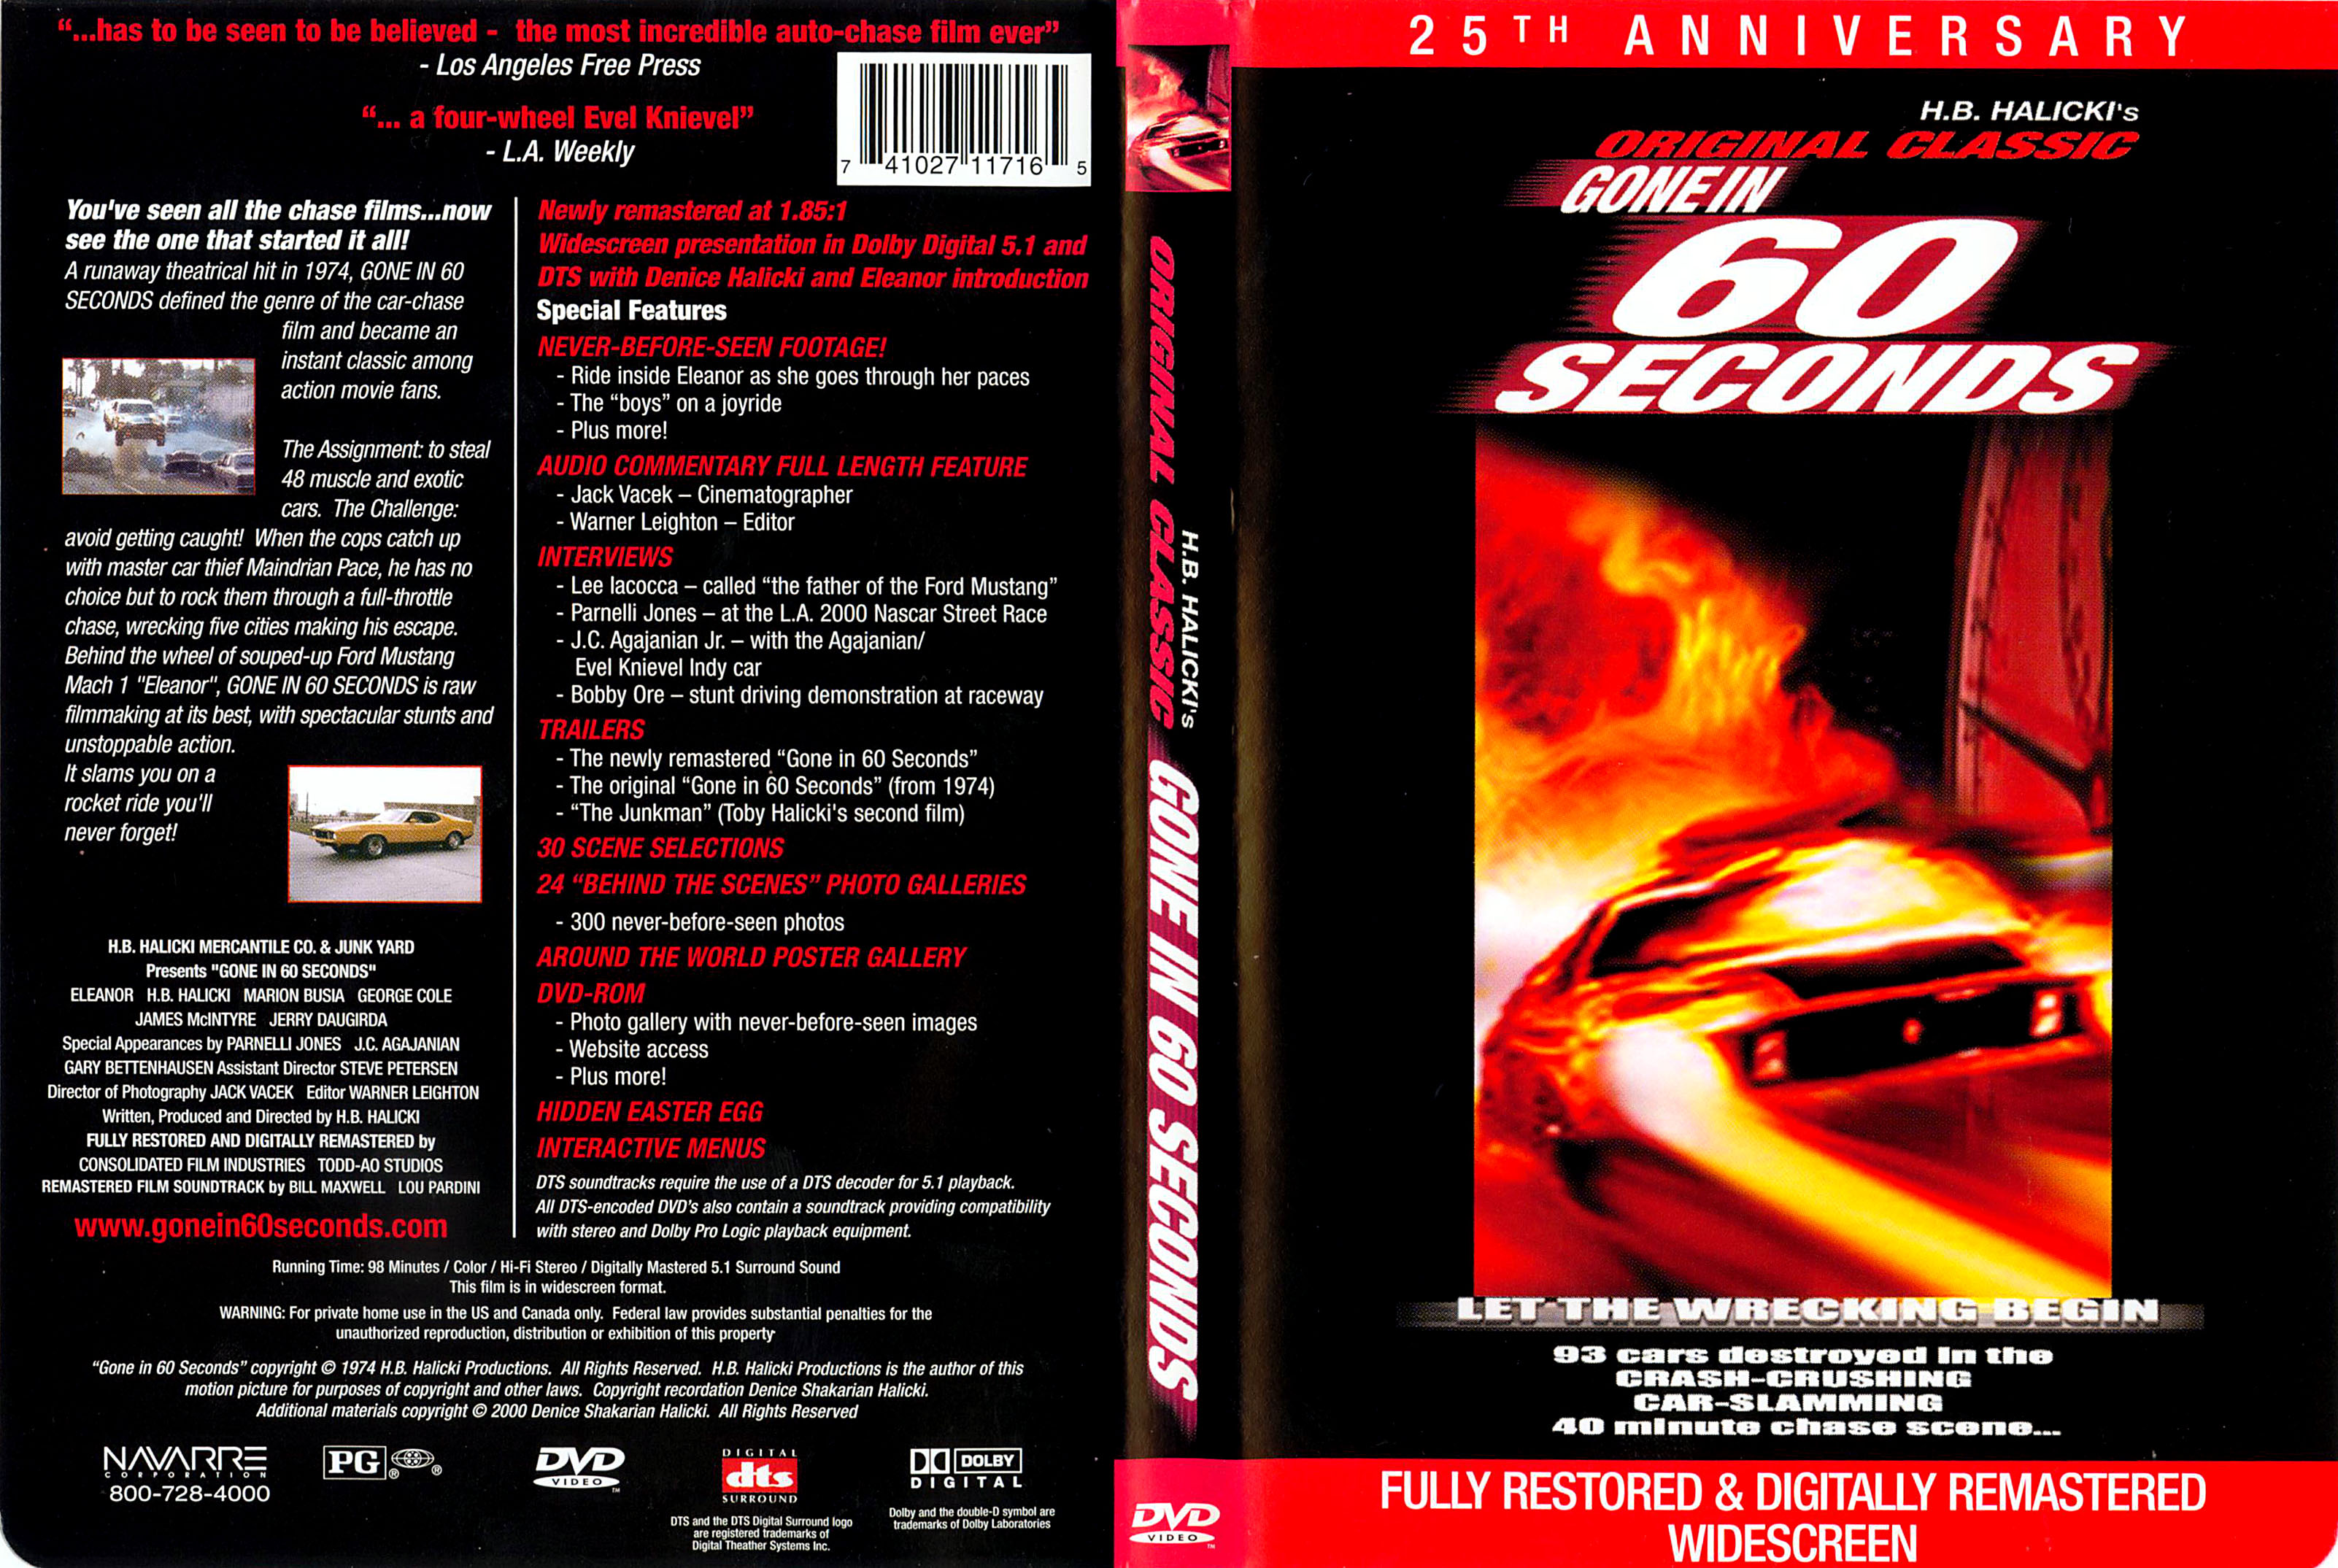 Gone in 60 Seconds (1974) - front back.